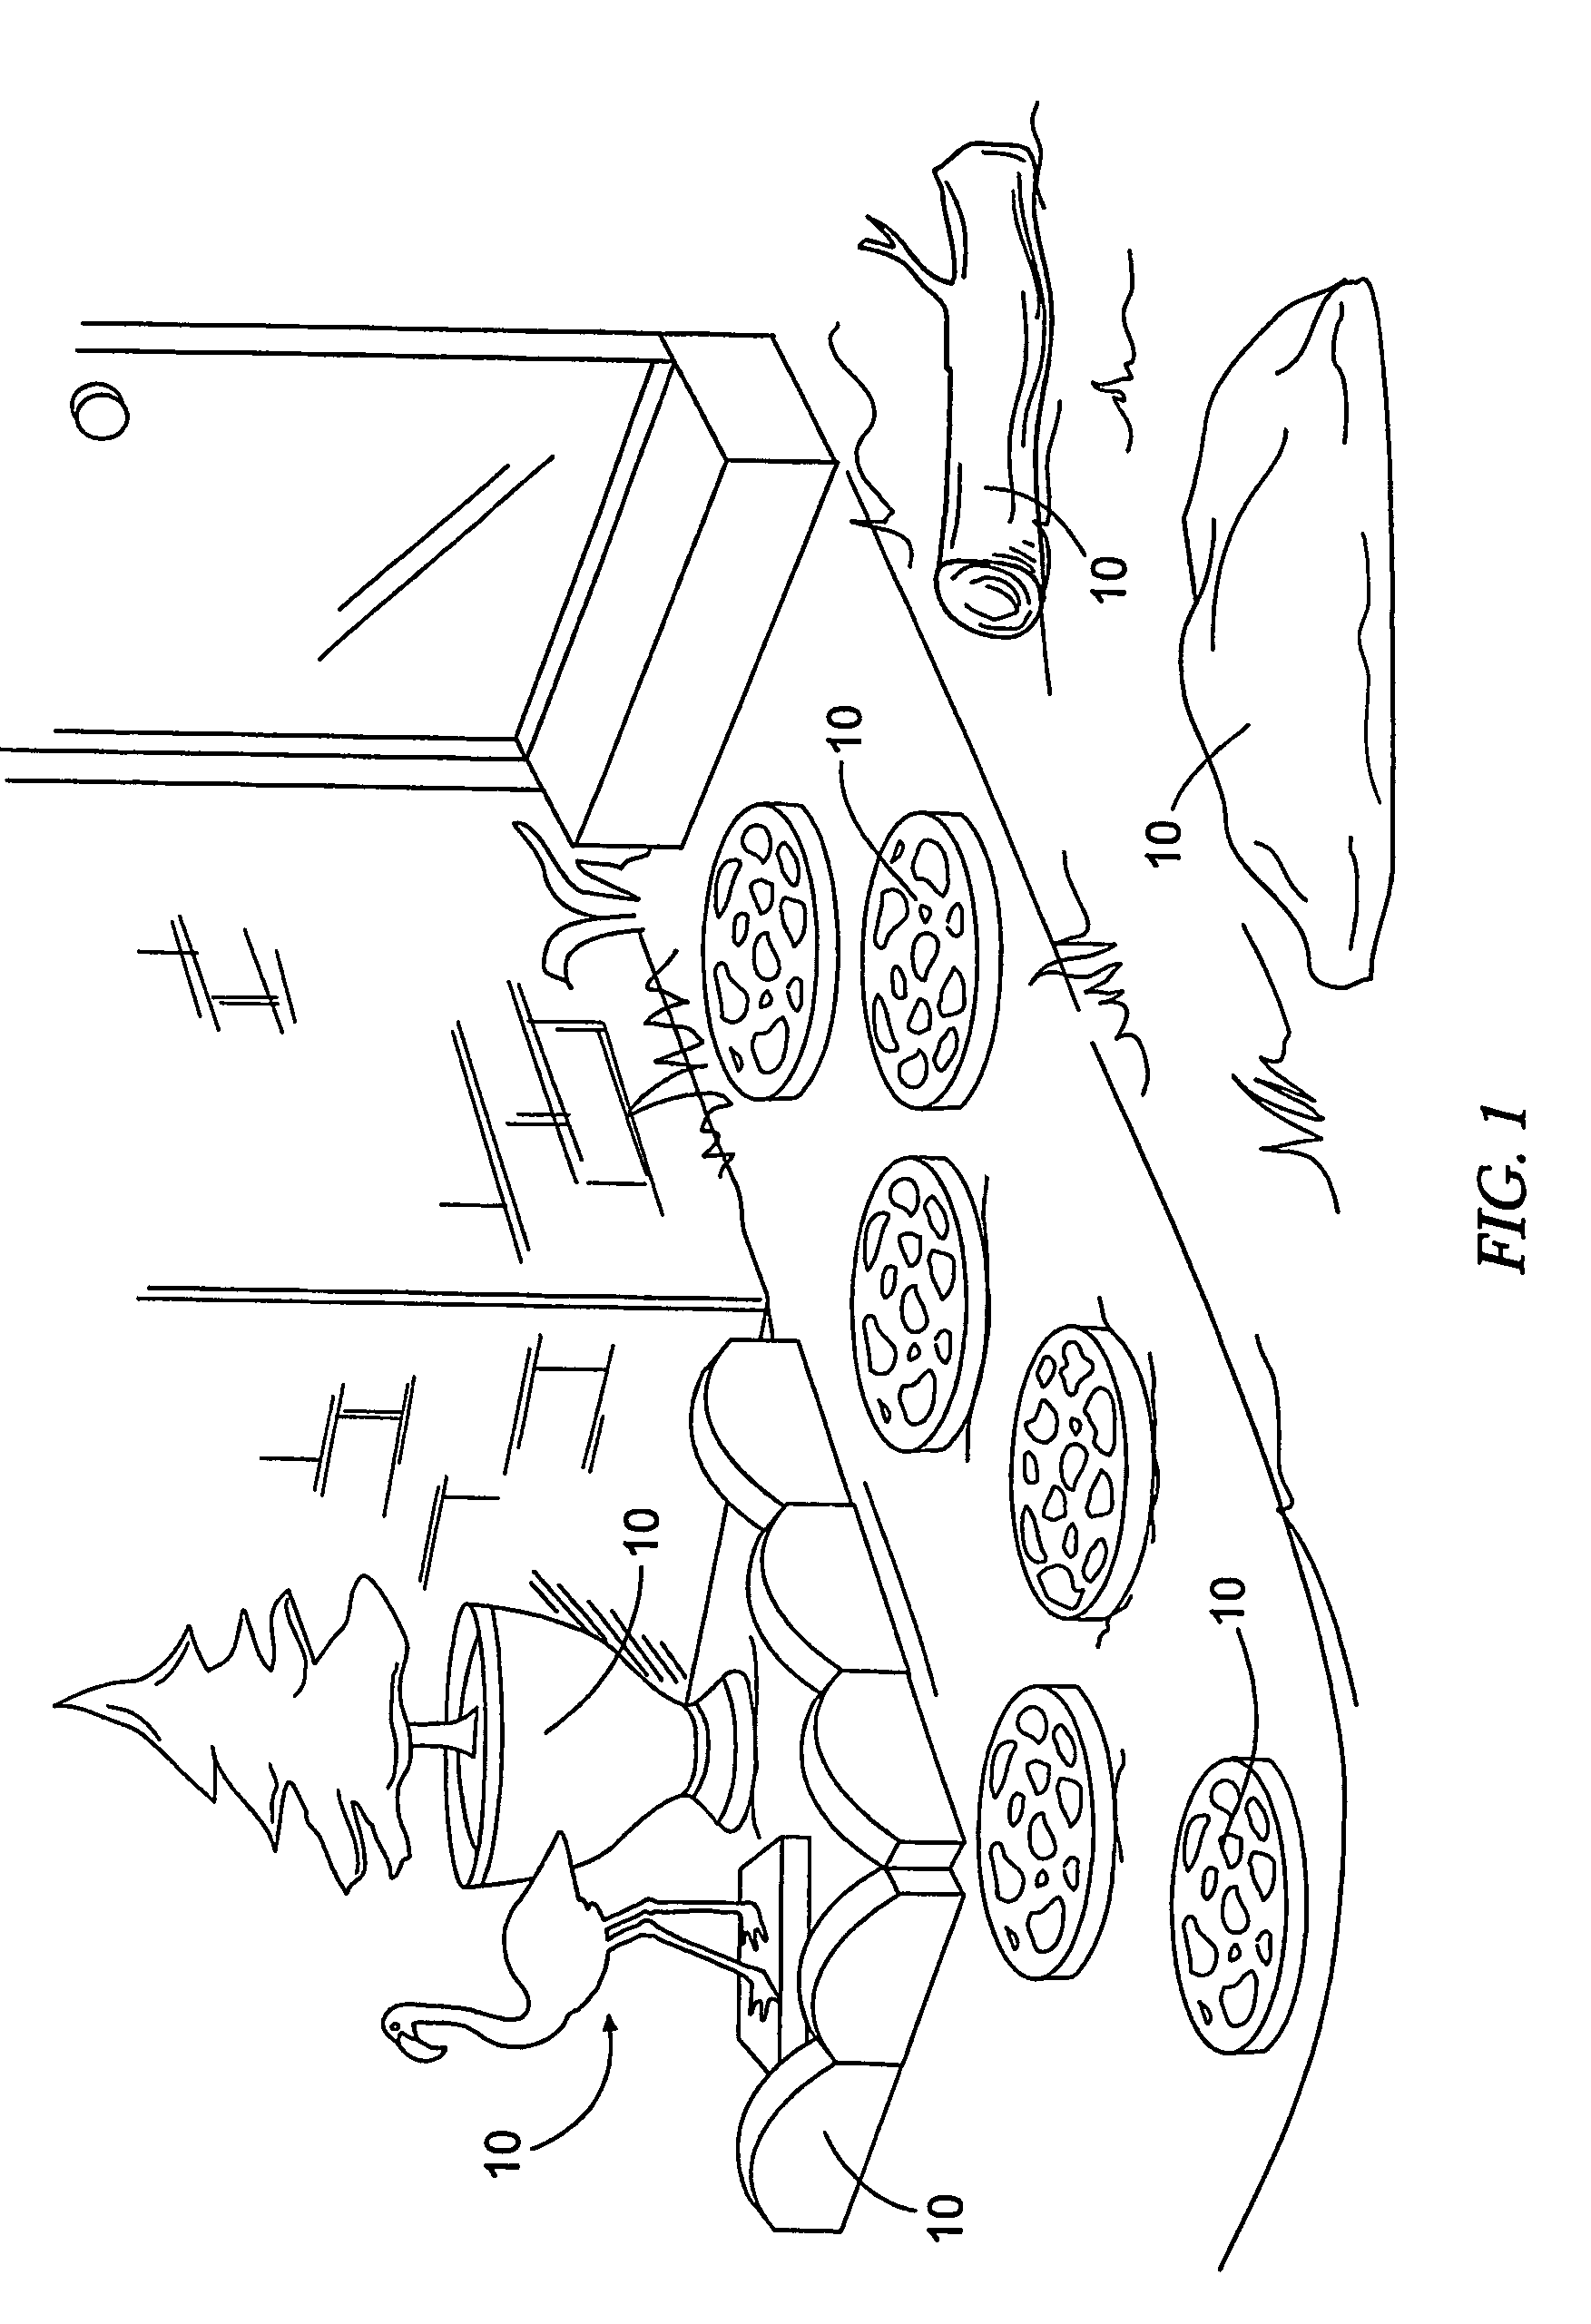 Termite-monitoring device and associated method